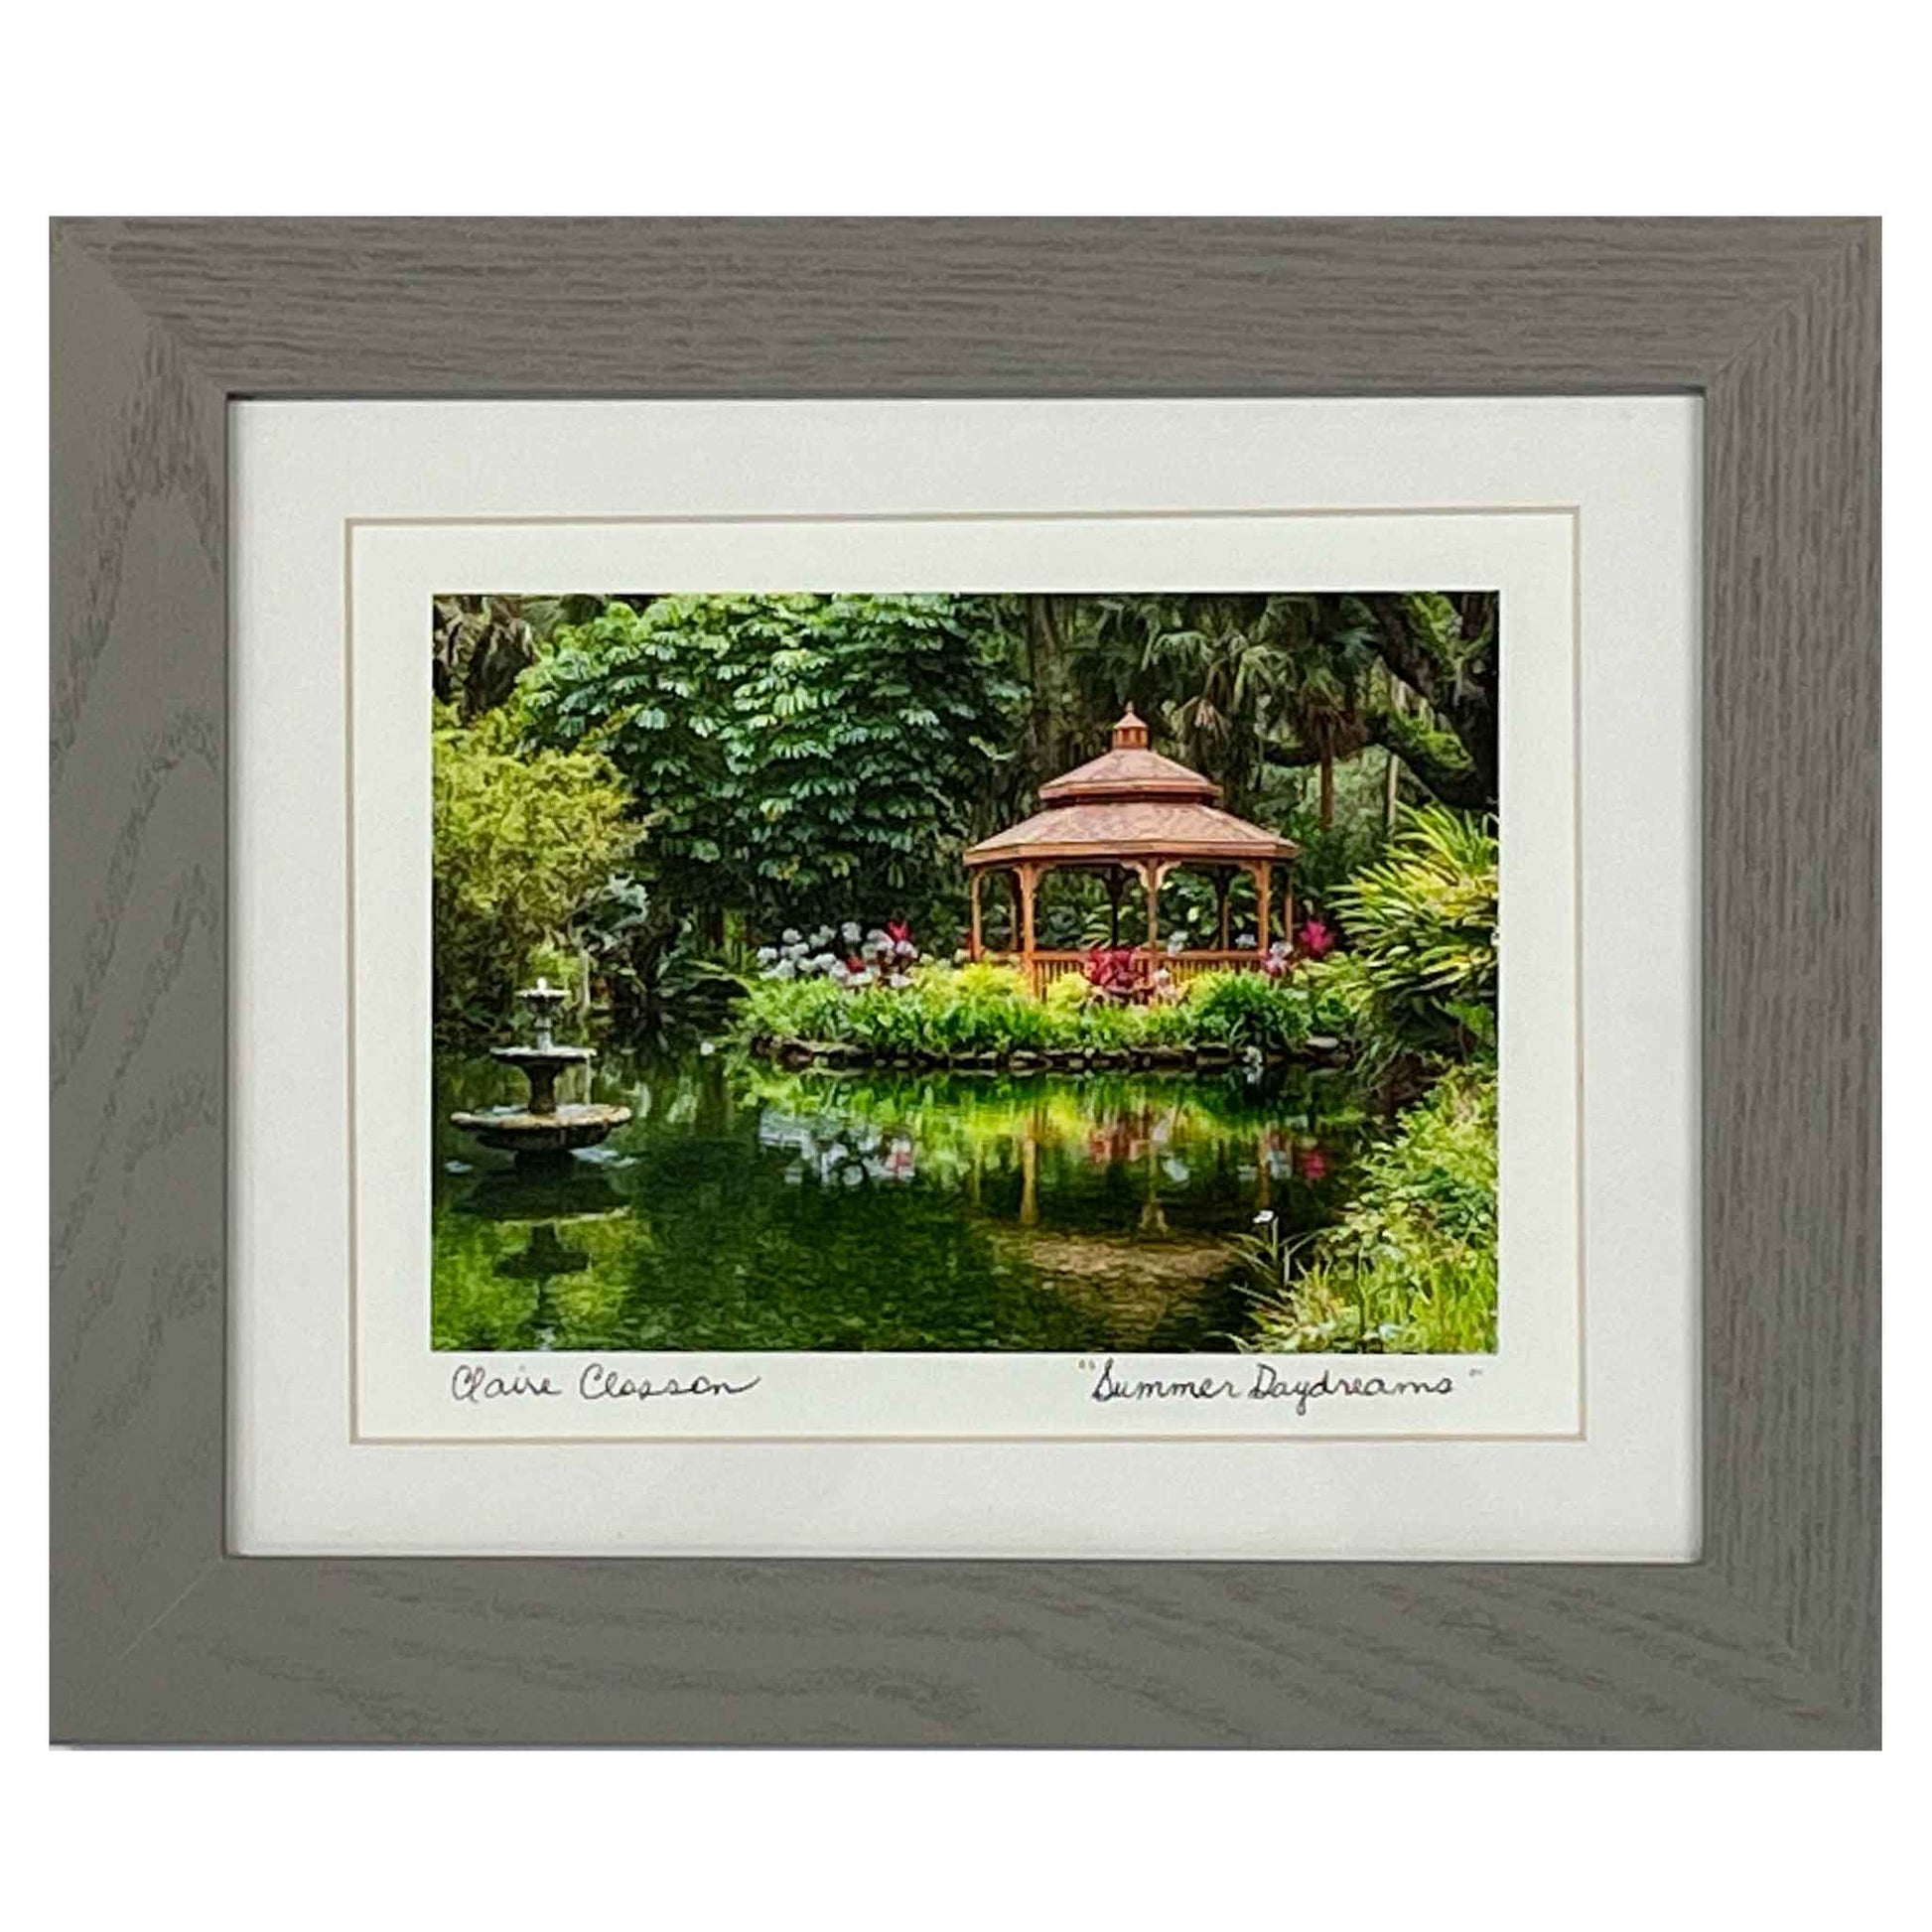 ECC “Summer Daydreams” Framed Print by Photographer Claire Closson. Stunning photograph of a gazebo on the water surrounded by flowers and lush green. A tiered fountain cascades water. Soft reflections in the water. A 5 x 7 print framed to 8 x 10 inches under glass. Matted in white with a gray wooden frame.